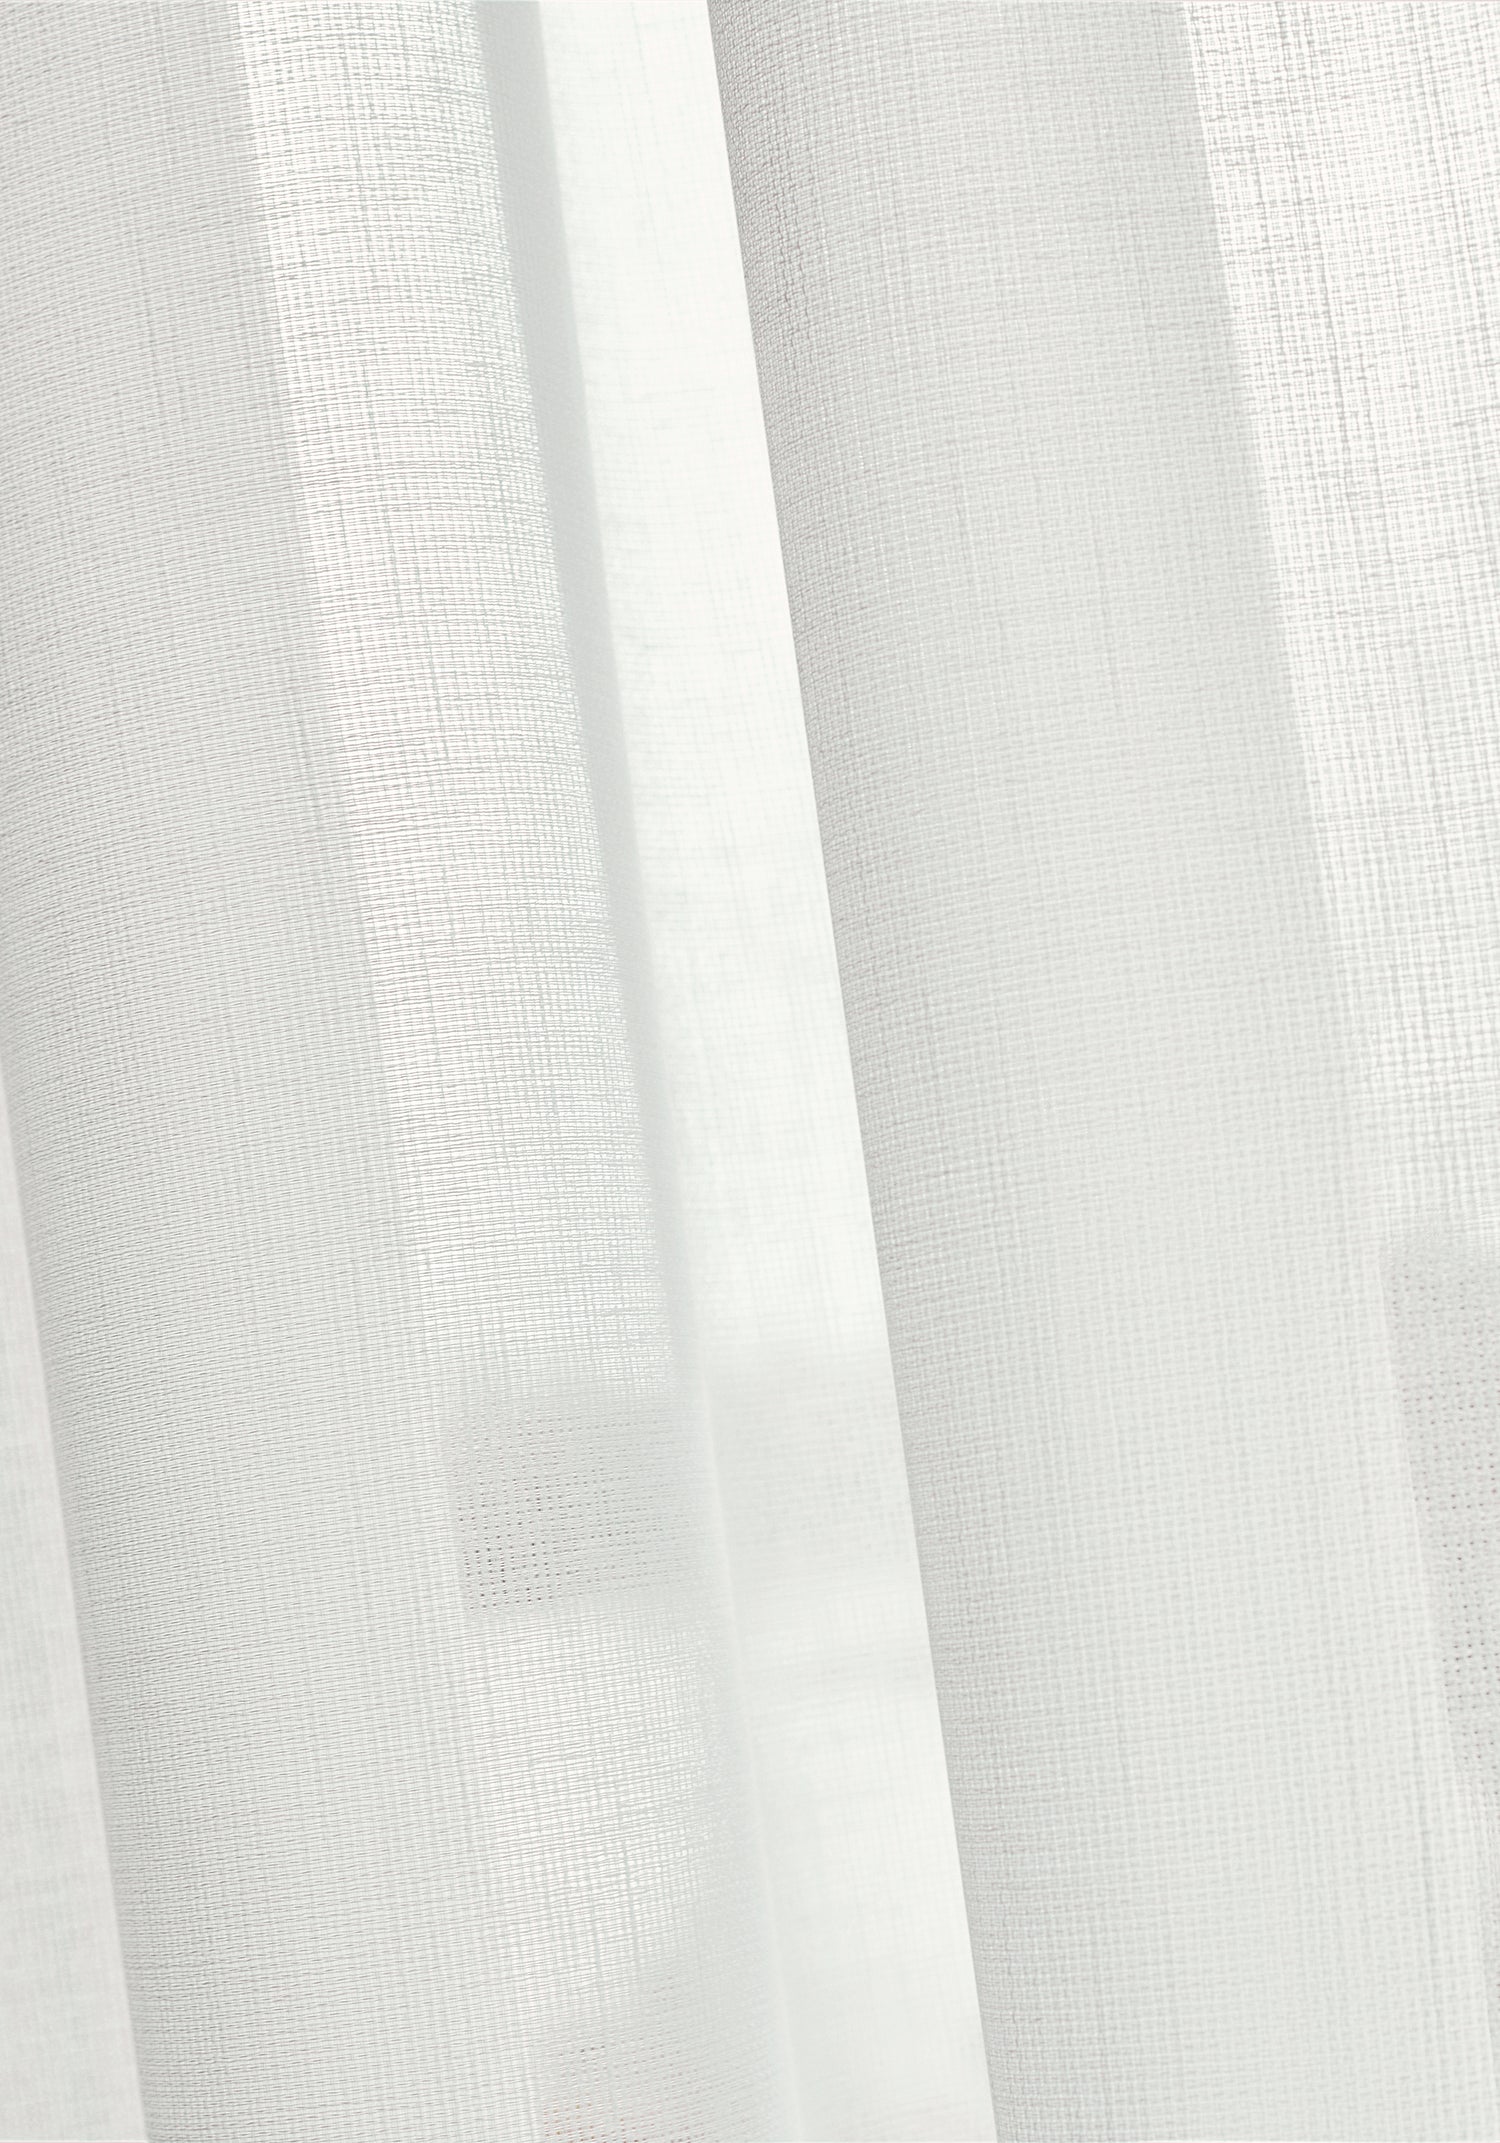 Sheer drapery curtains made with Thibaut Abbot woven fabric in Snow White color, pattern FWW7144